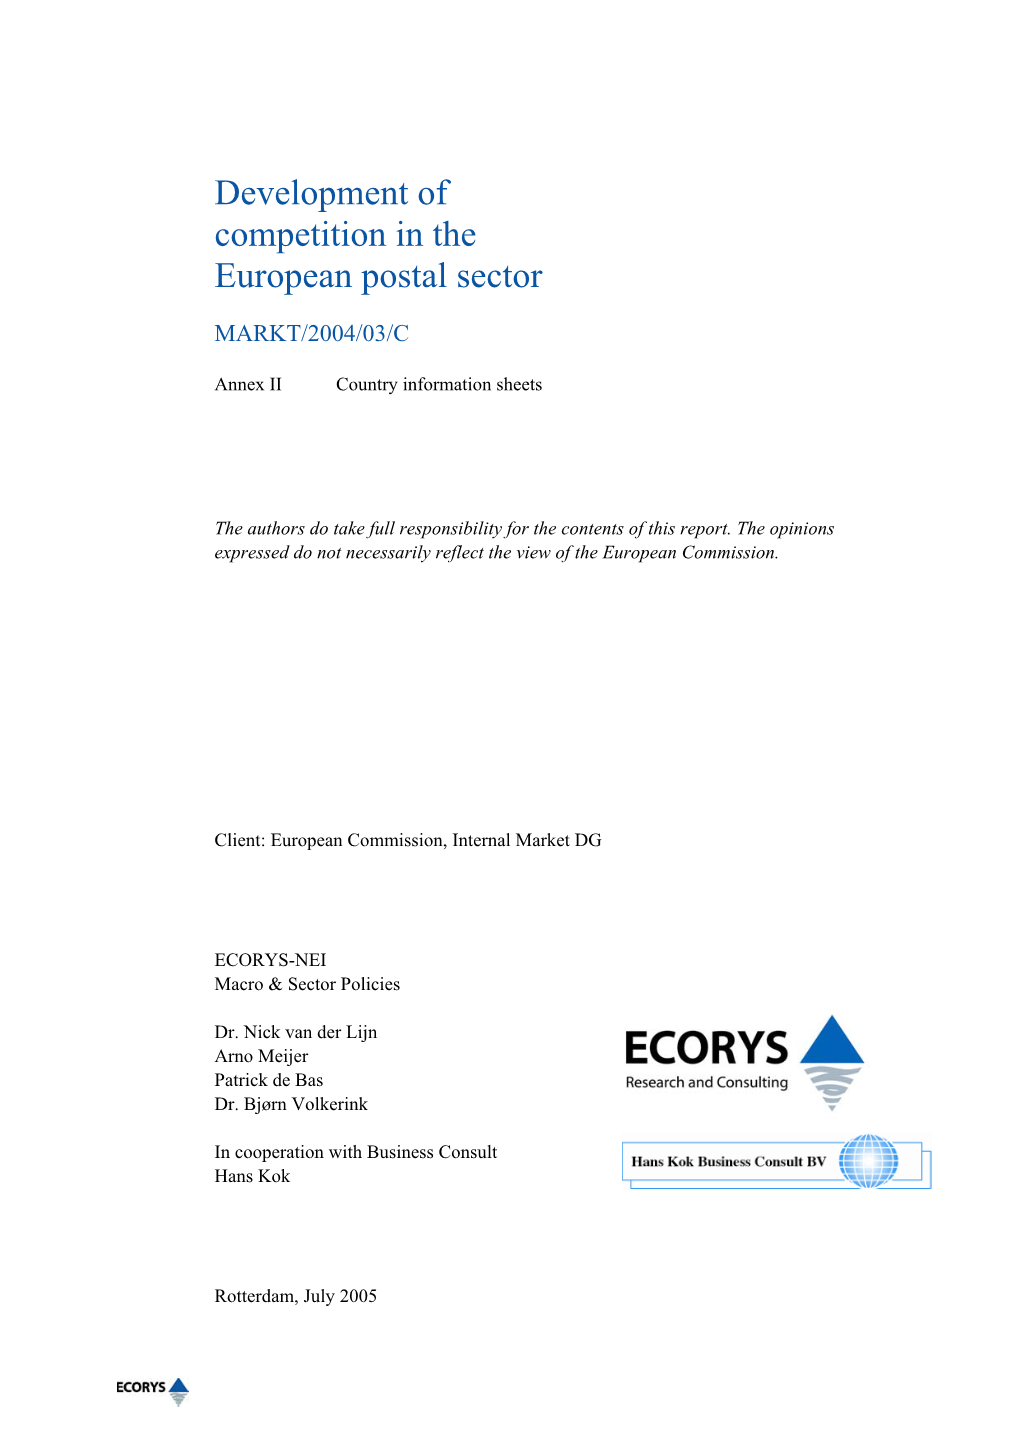 Development of Competition in the European Postal Sector